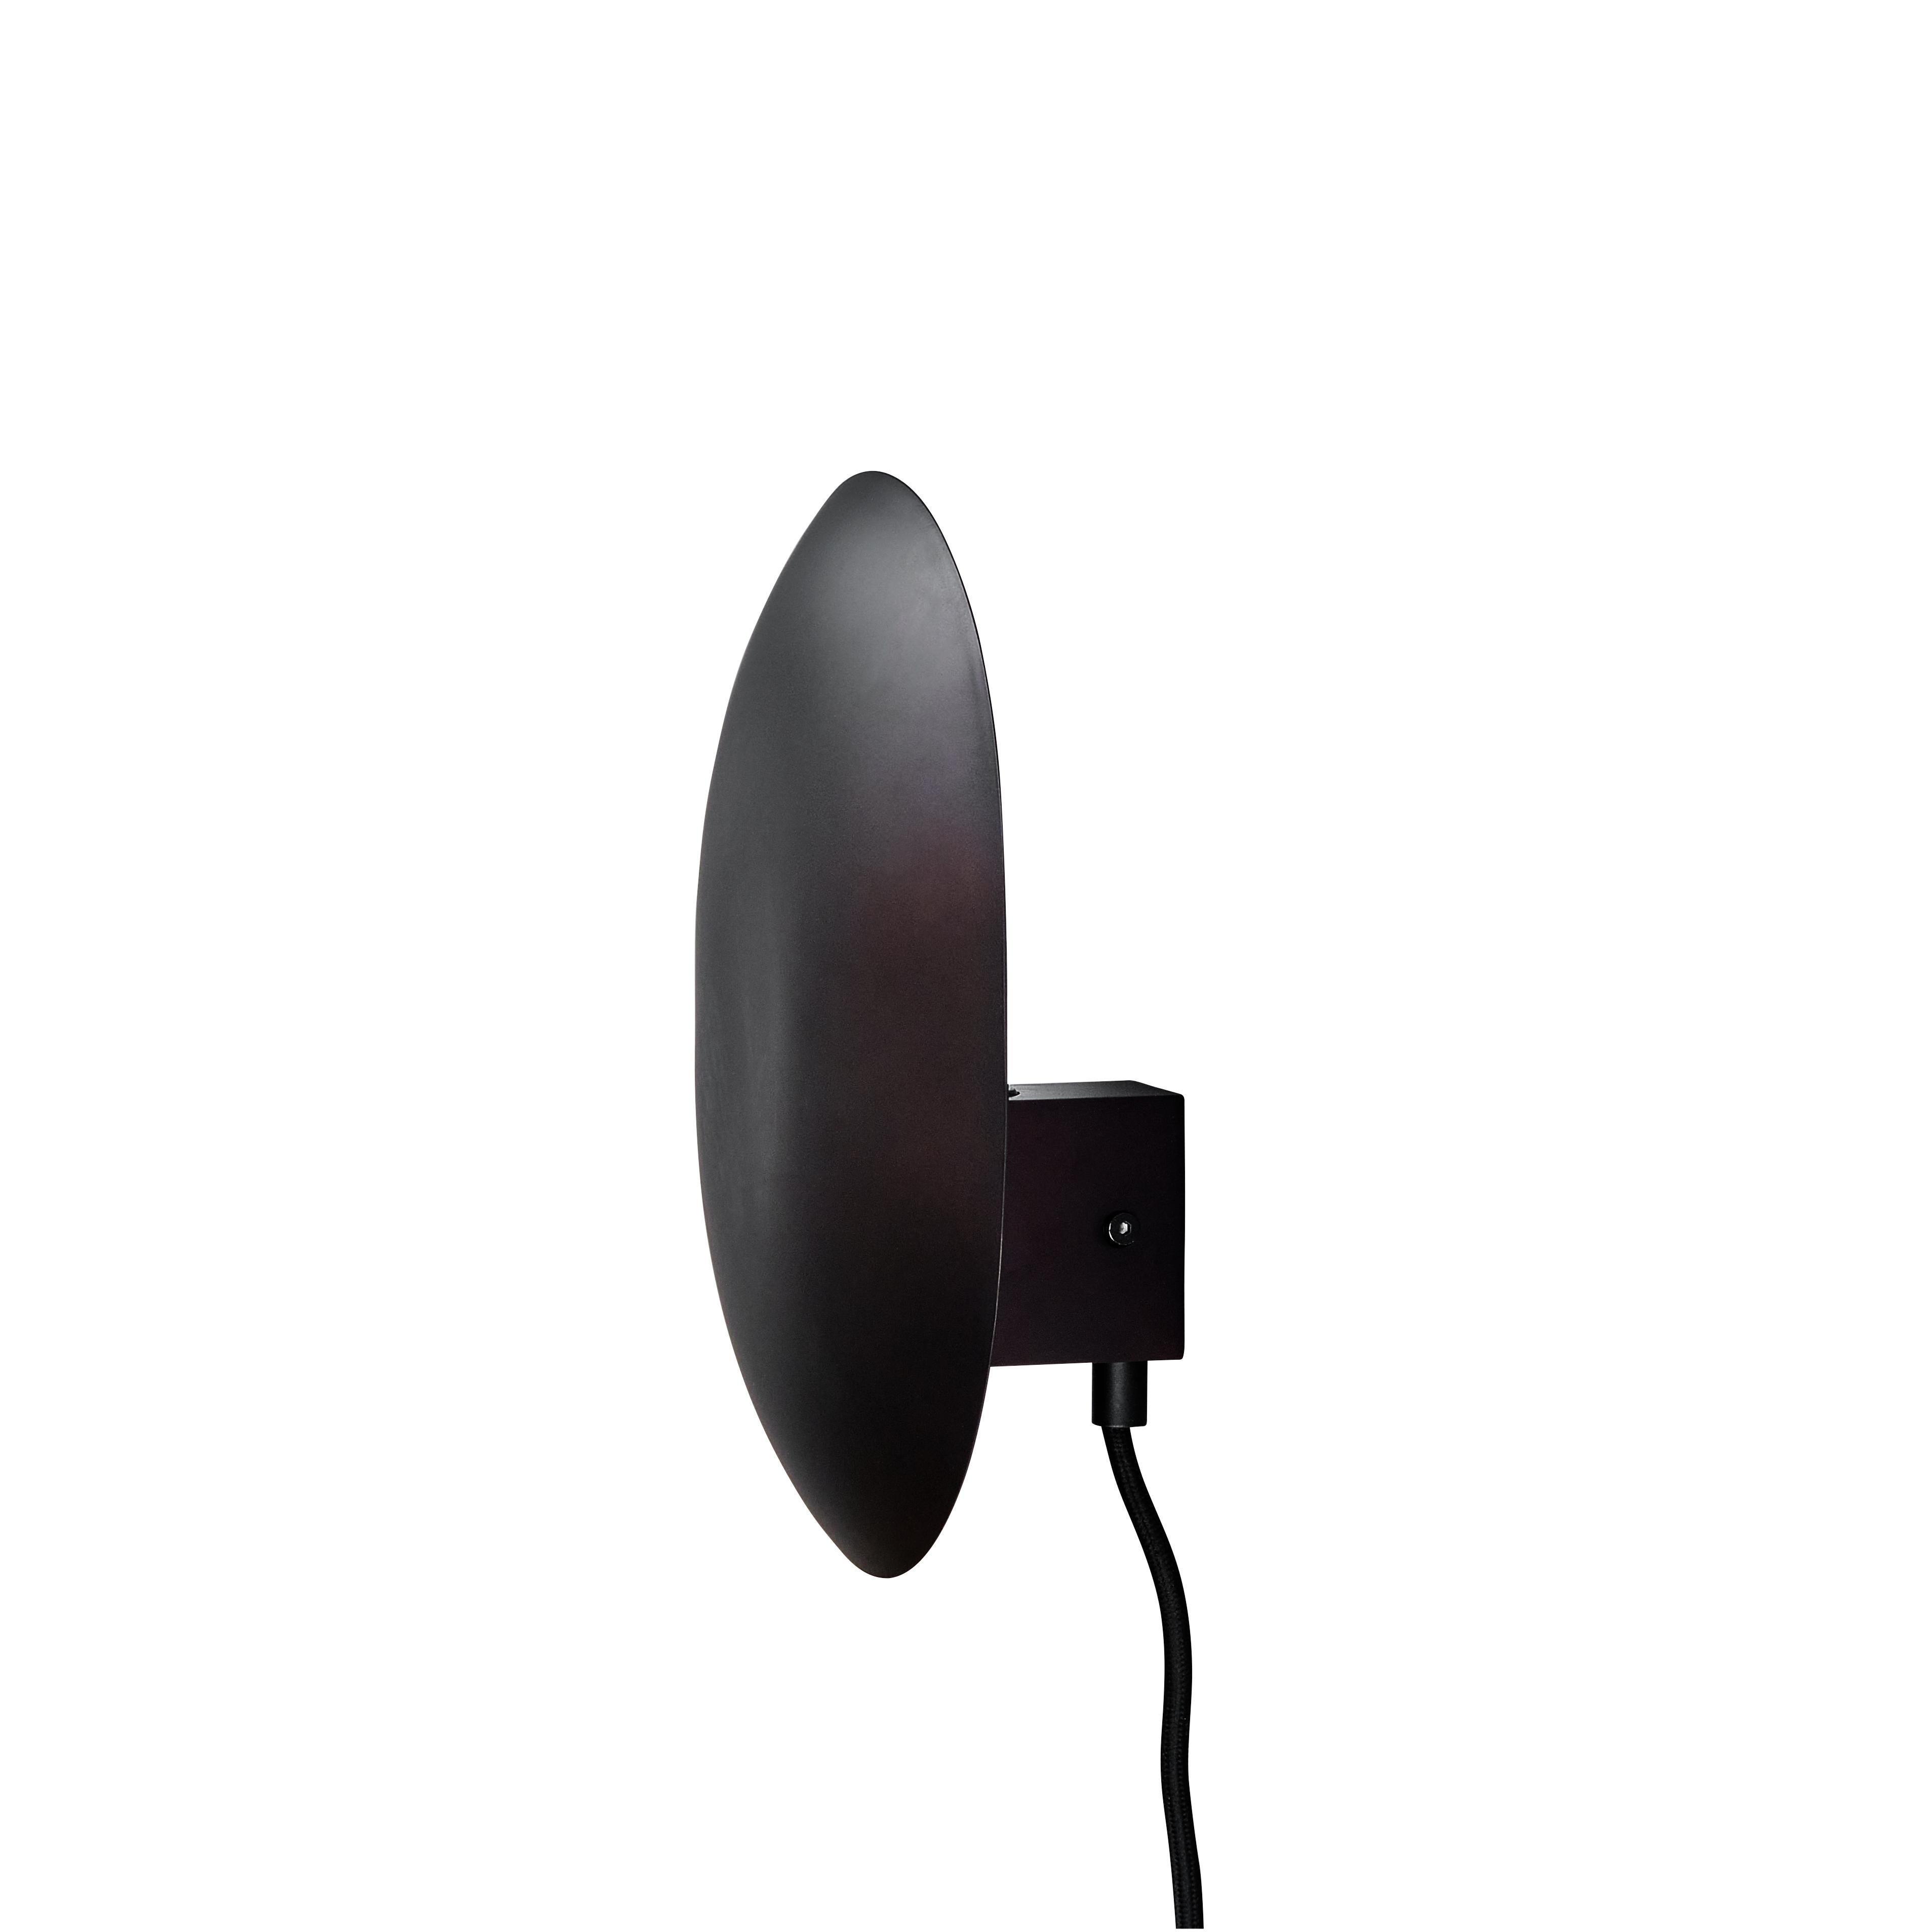 Burned black clam wall lamp by 101 Copenhagen
Designed by Kristian Sofus Hansen & Tommy Hyldahl
Dimensions: L 14 x W 22 x H 26 cm
Cable length: 170 cm
This product is not wired for USA
Materials: metal: plated metal / burned black
Cable: fabric